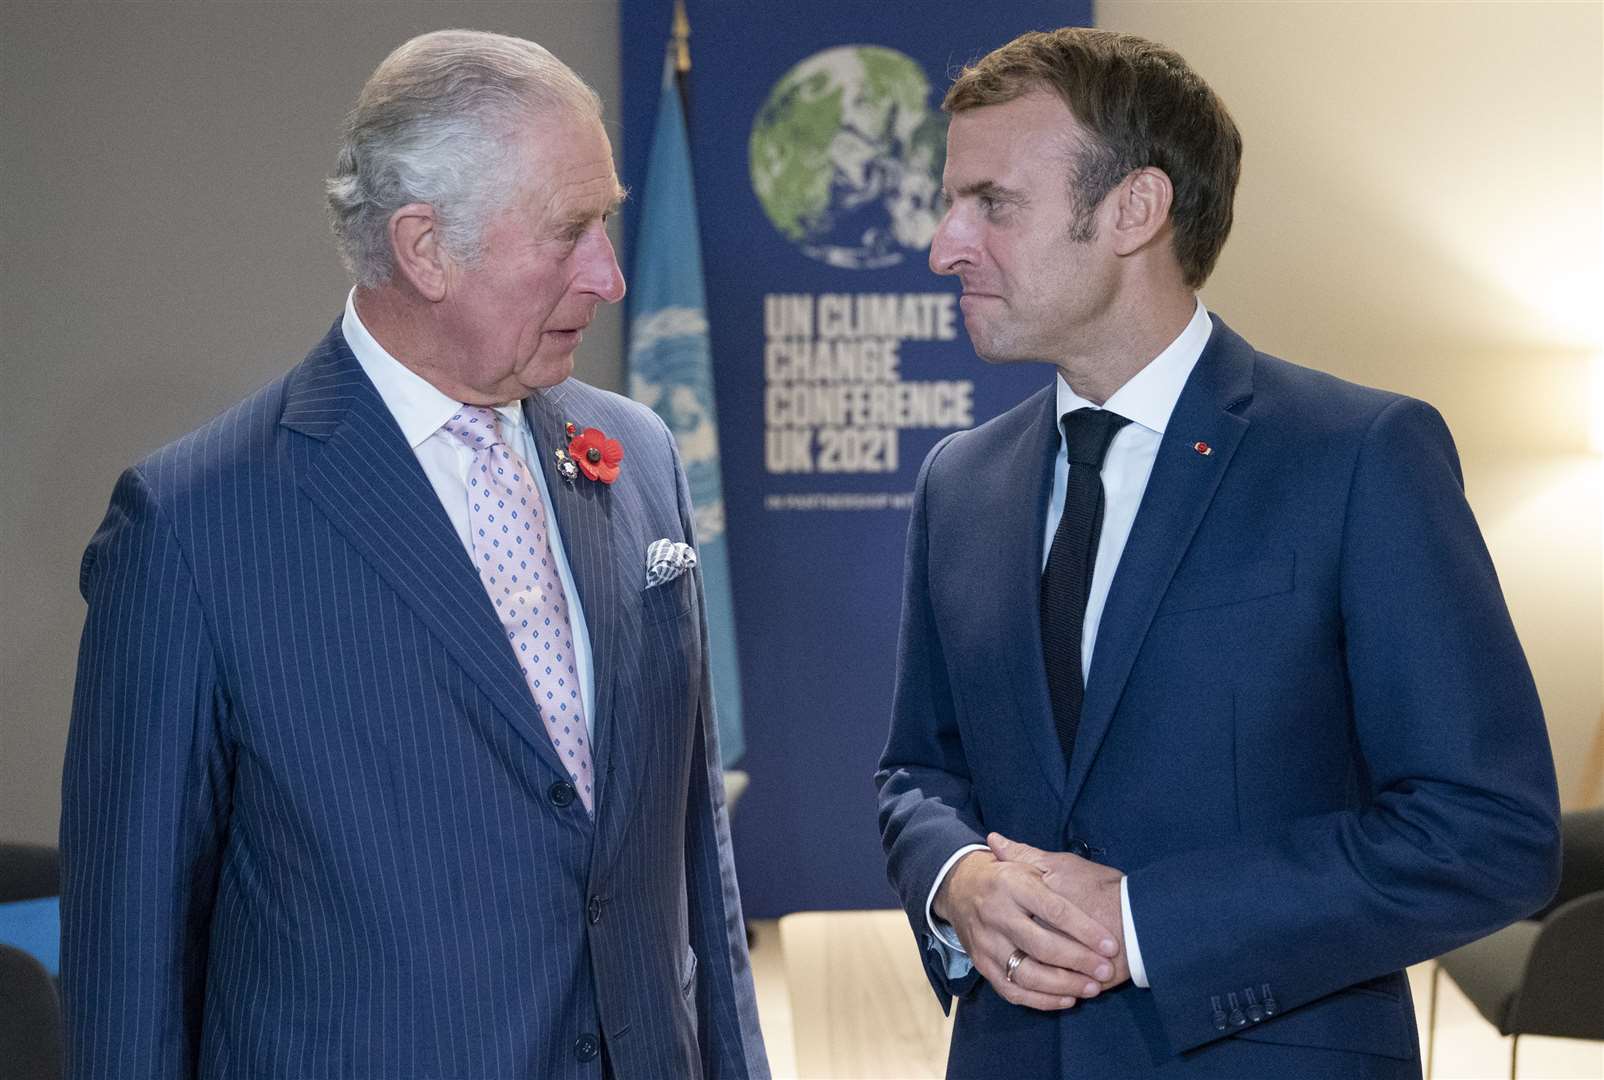 Charles with French President Emmanuel Macron at the Cop26 summit (Jane Barlow/PA)